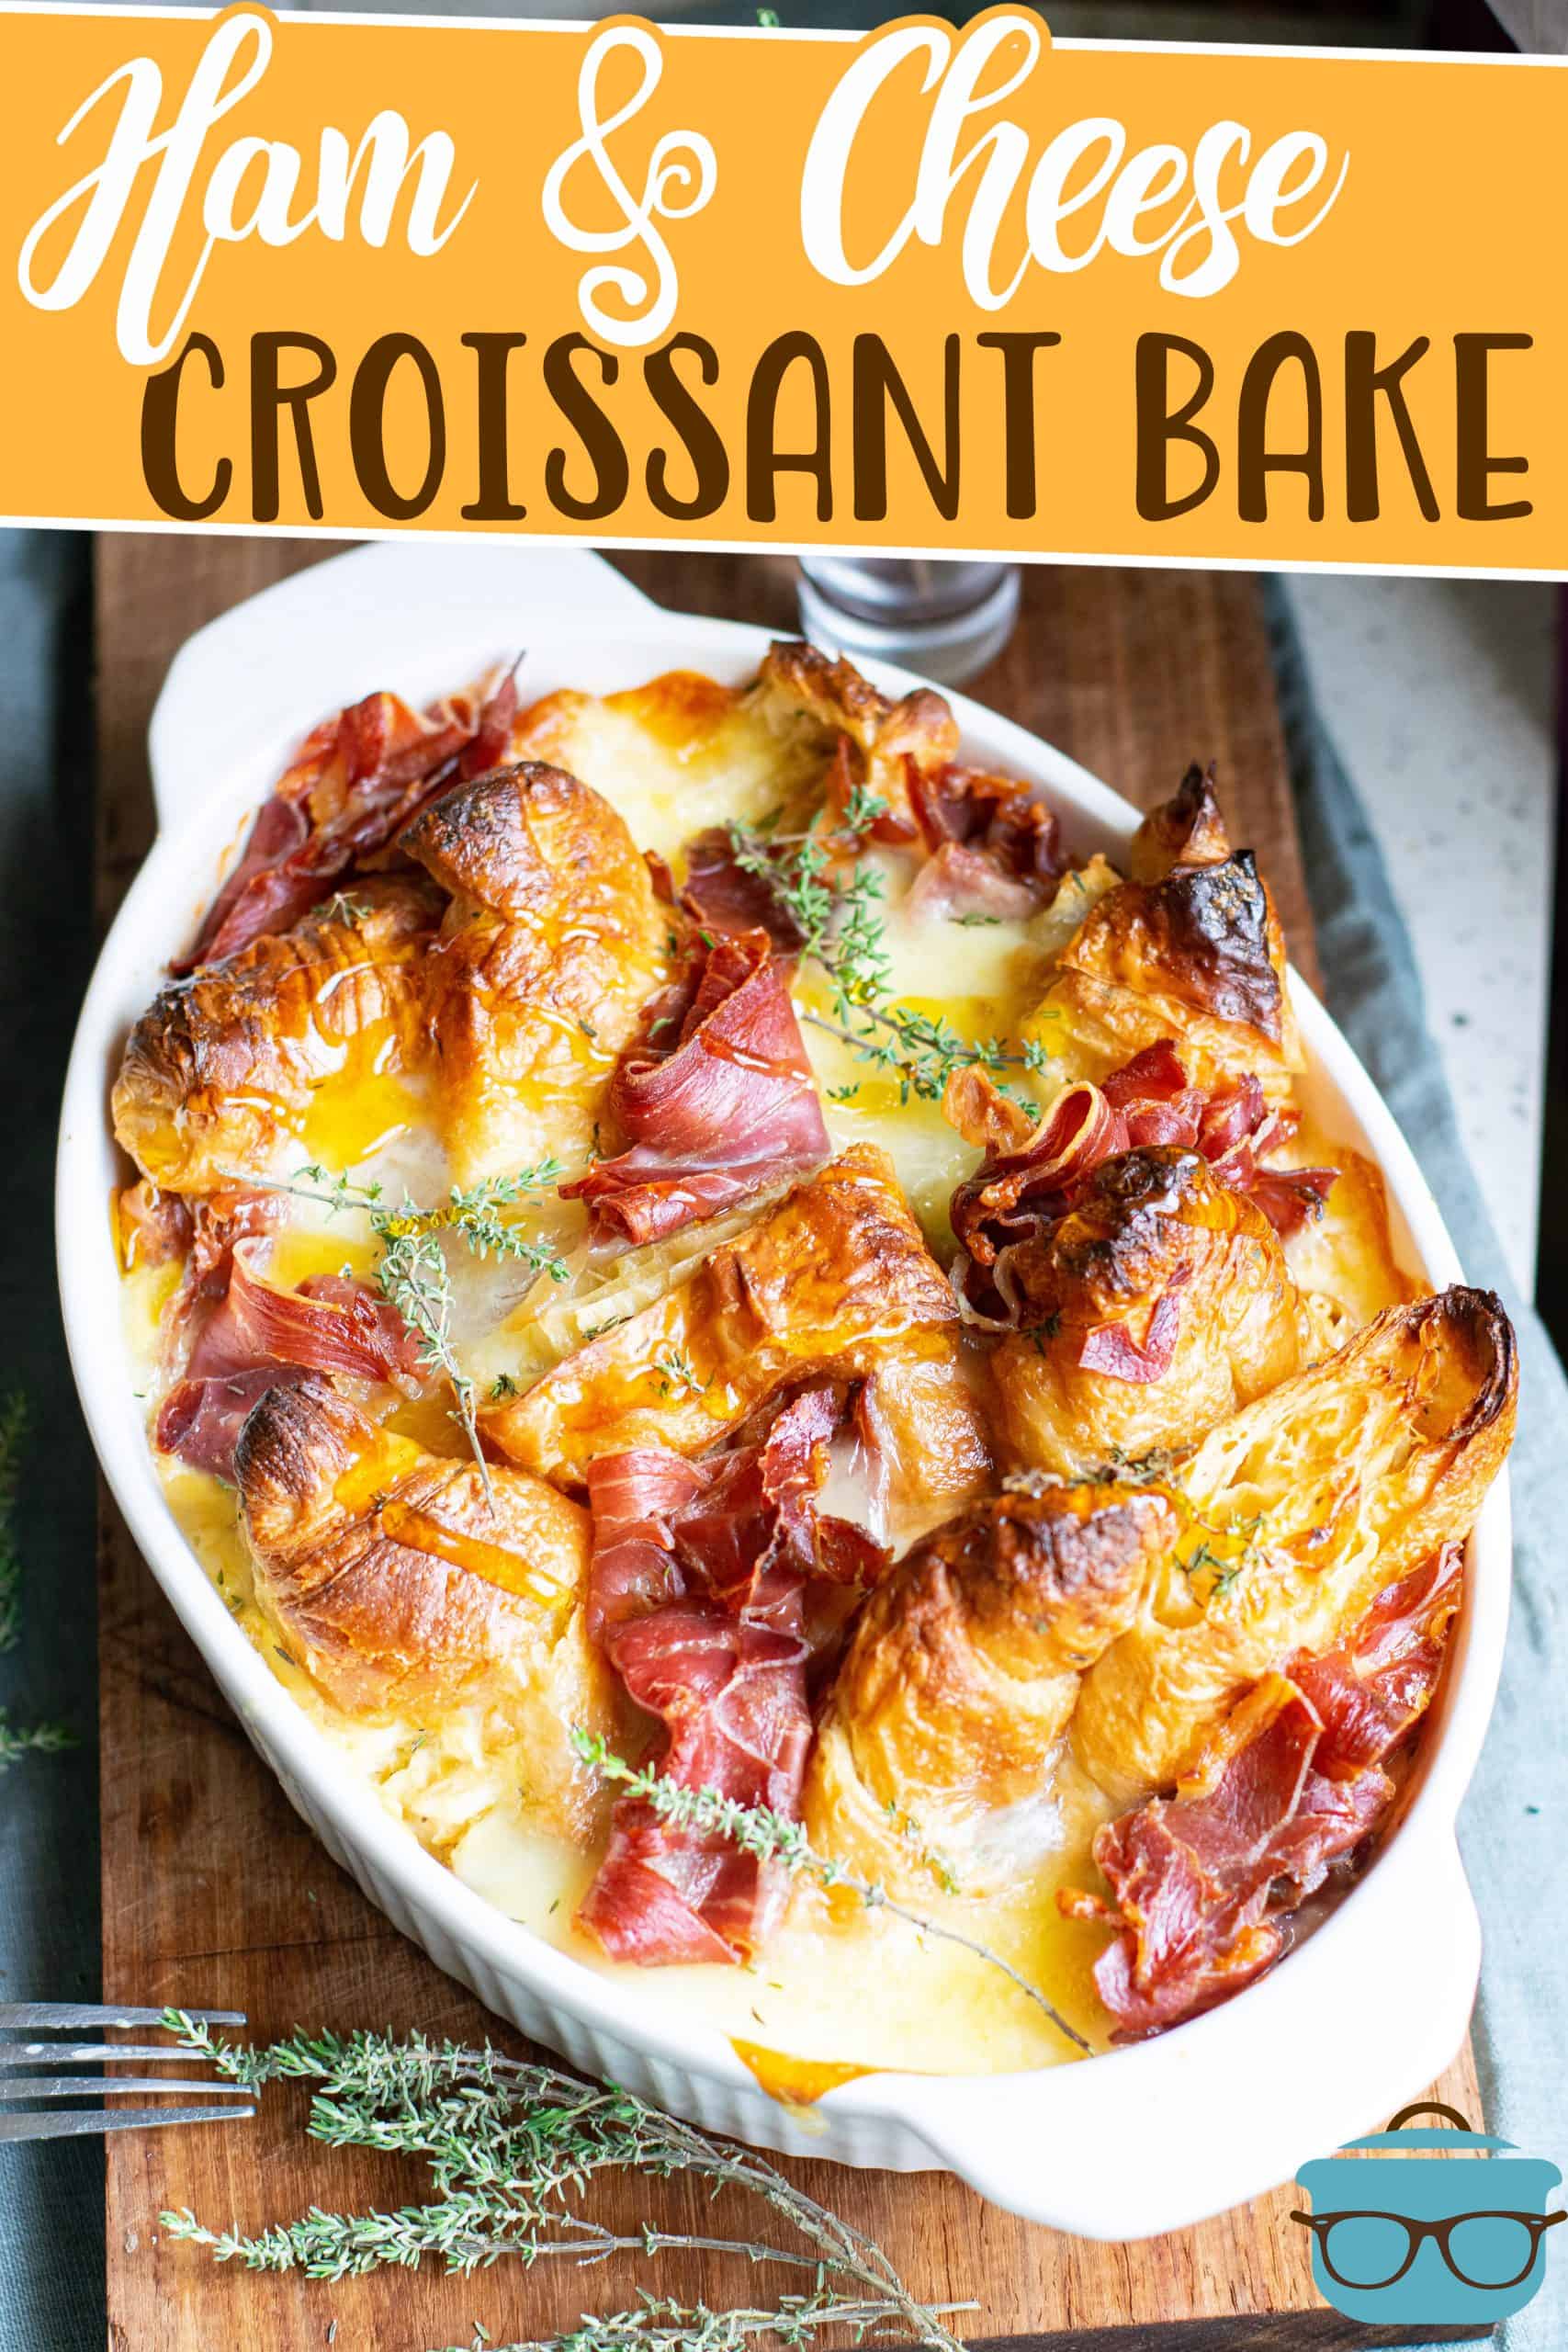 Ham and Cheese Croissant Bake recipe from The Country Cook, shown in a white oval baking dish with a sprig of thyme off to the side of the dish.